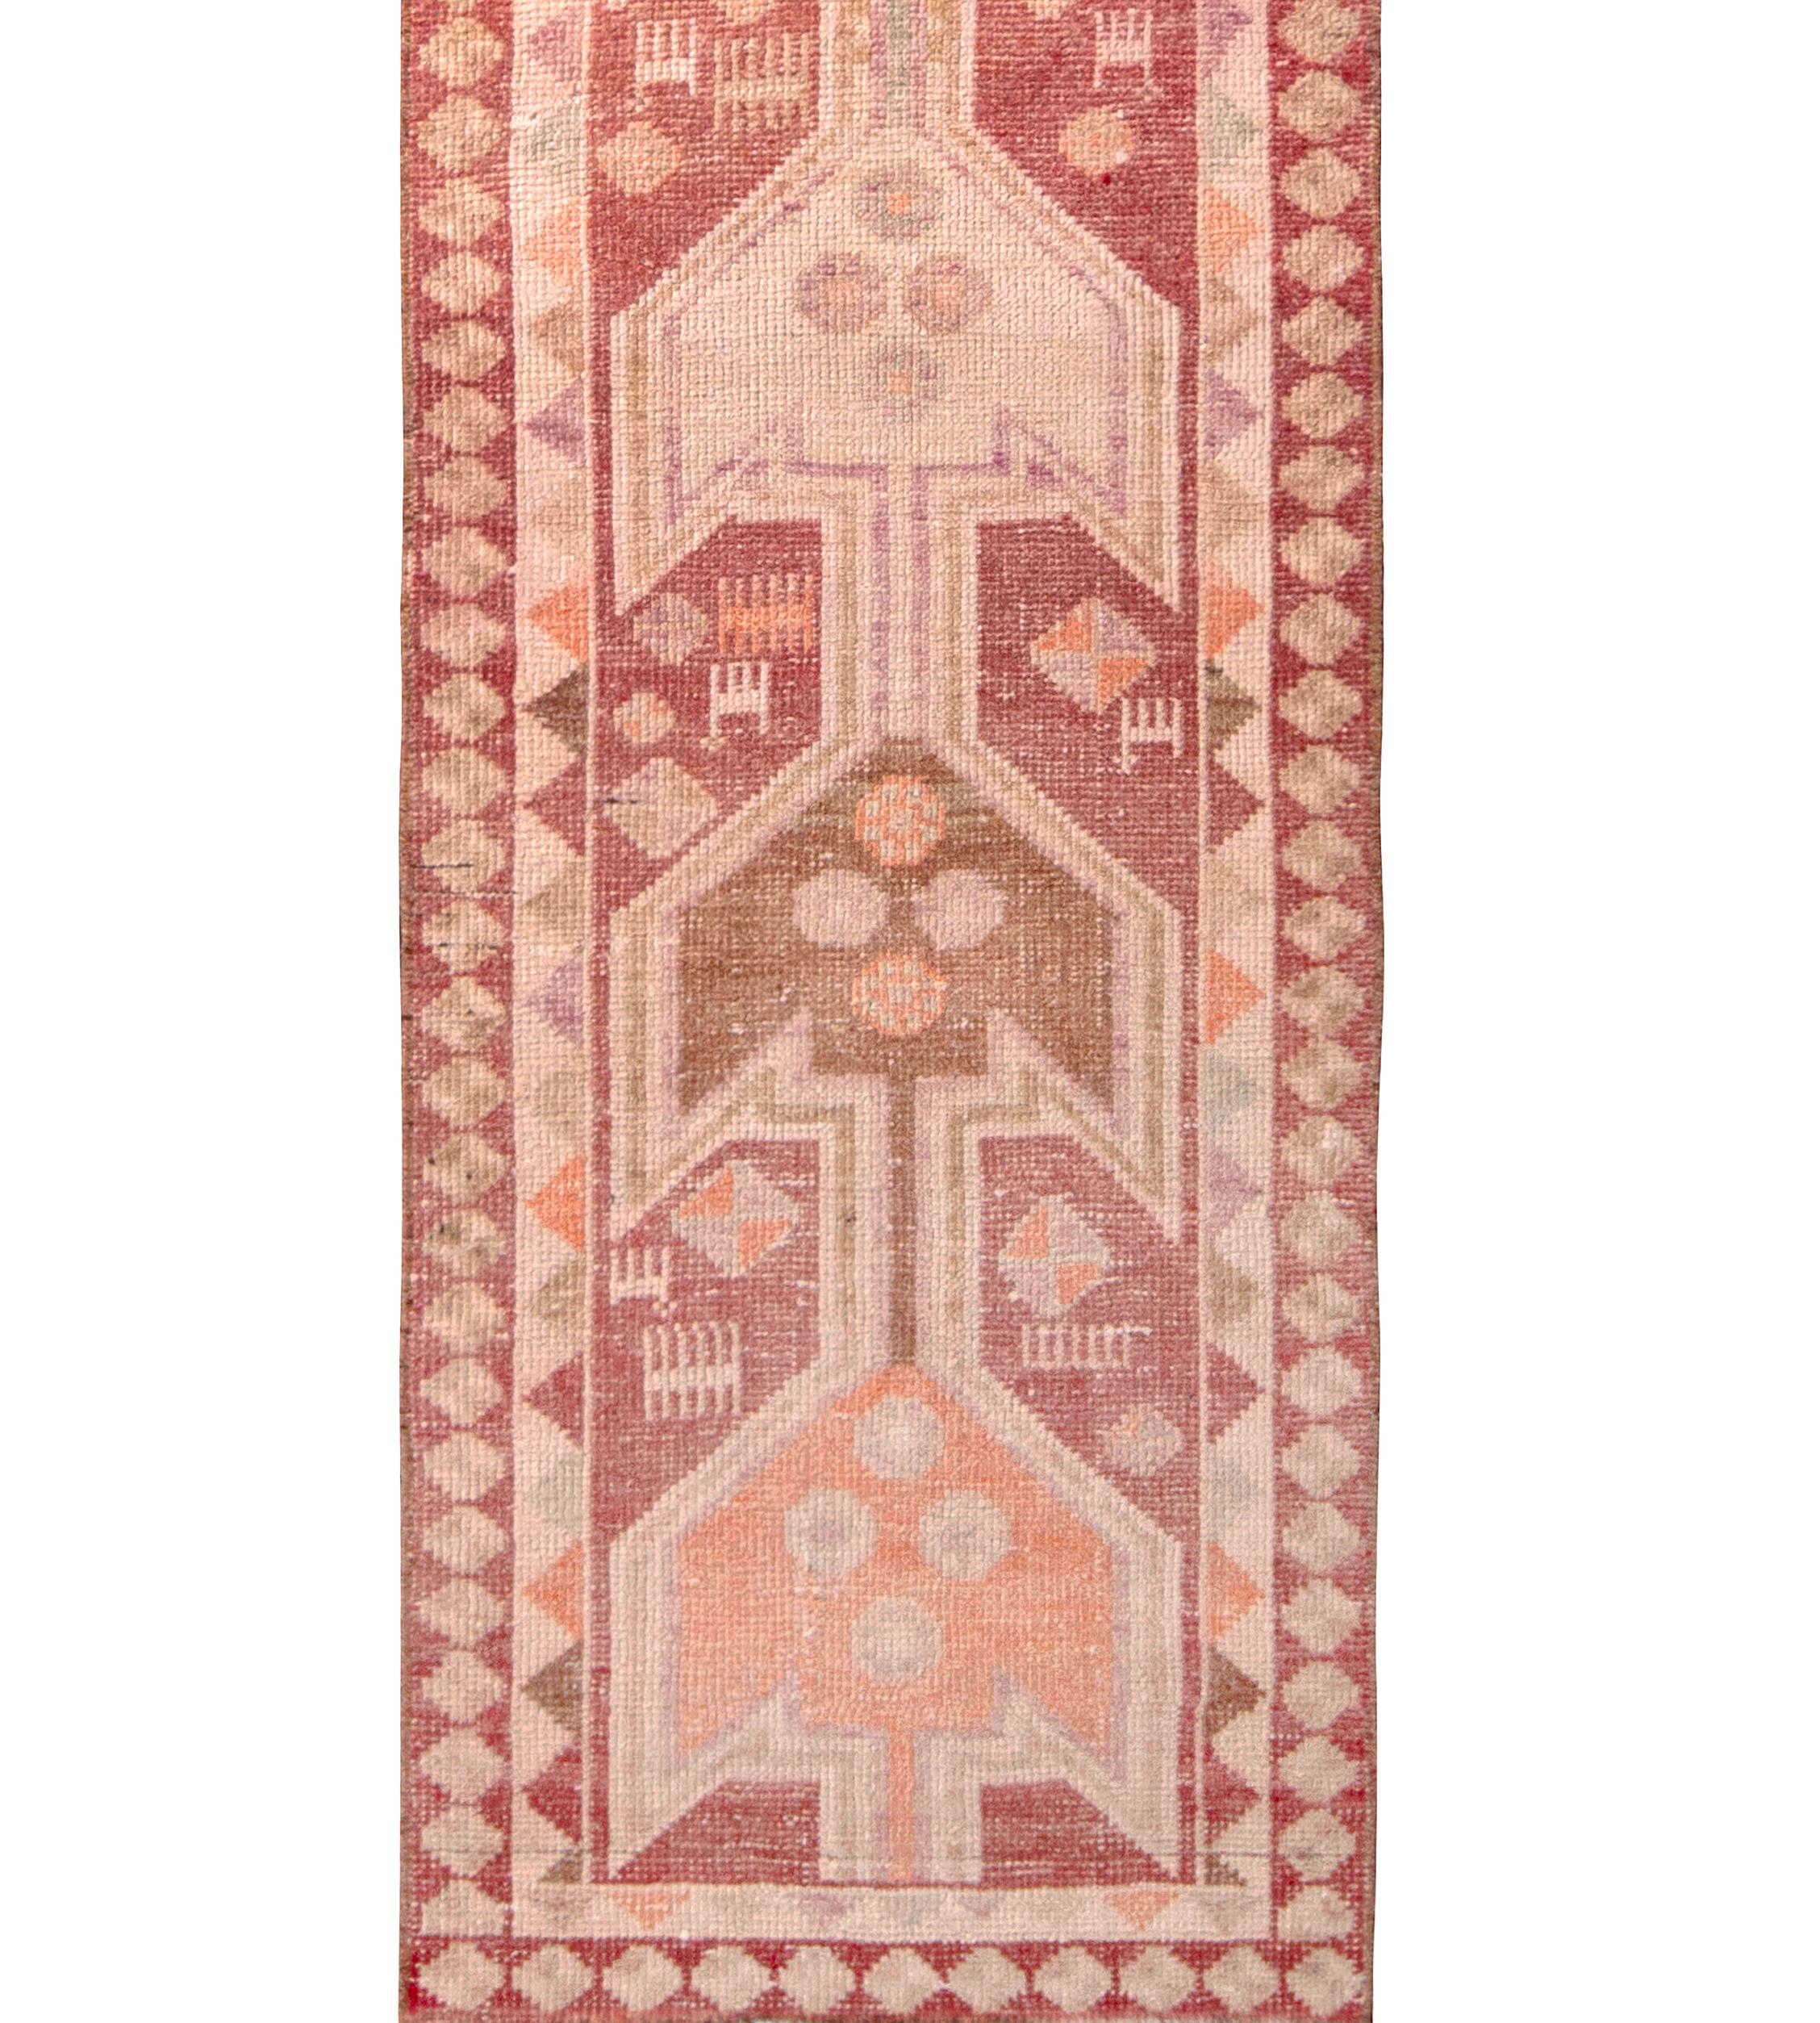 Hand knotted in wool originating from Turkey circa 1950-1960, this 3 x 11 runner connotes a vintage runner of both rich and playful color–a pallet of red and beige with lively transitional accents bringing out the tribal sense of movement this